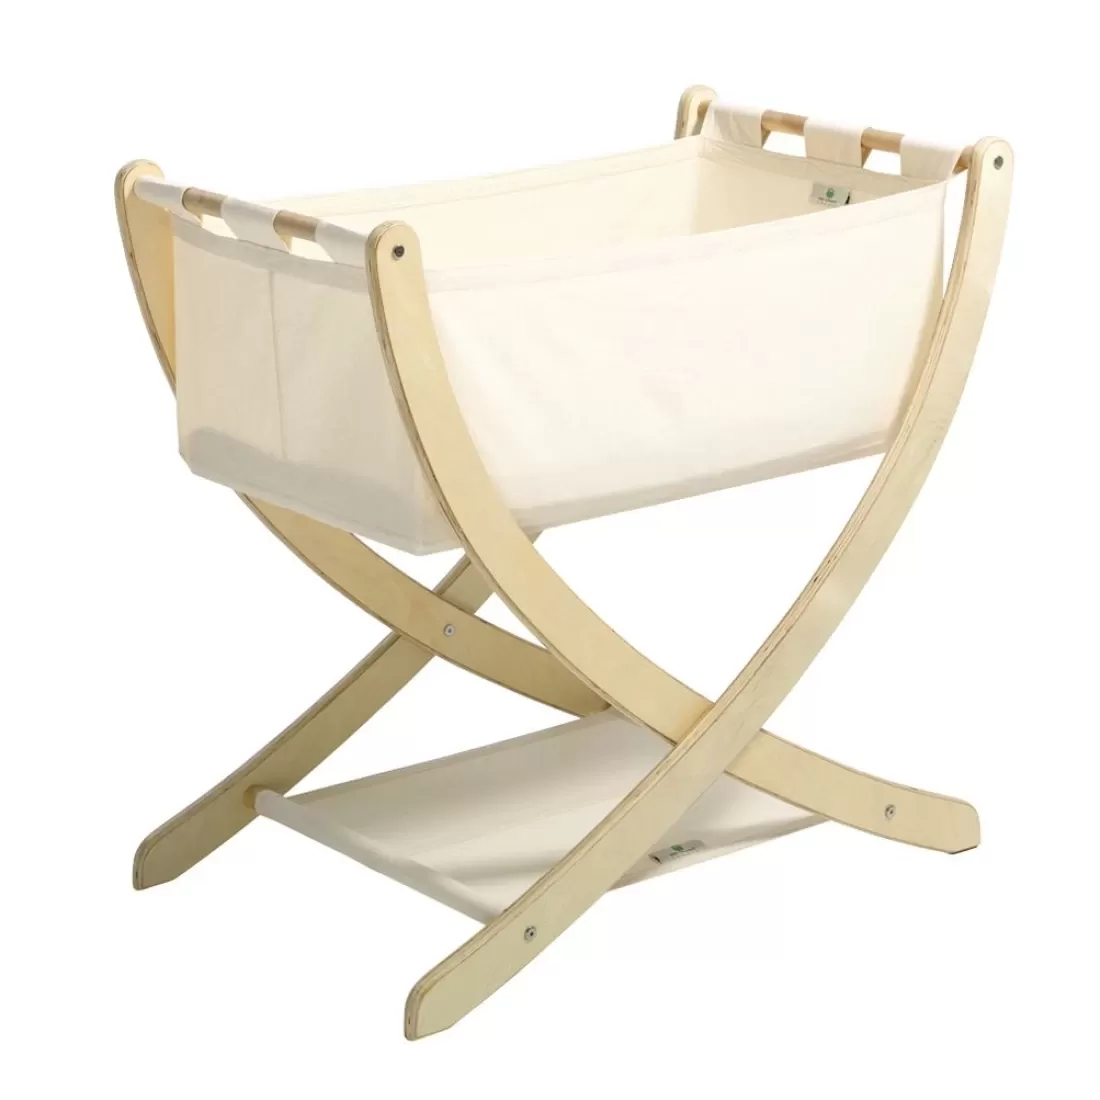 Roger Armstrong Seed Organic Cotton Baby Bassinet Rrp 249 95